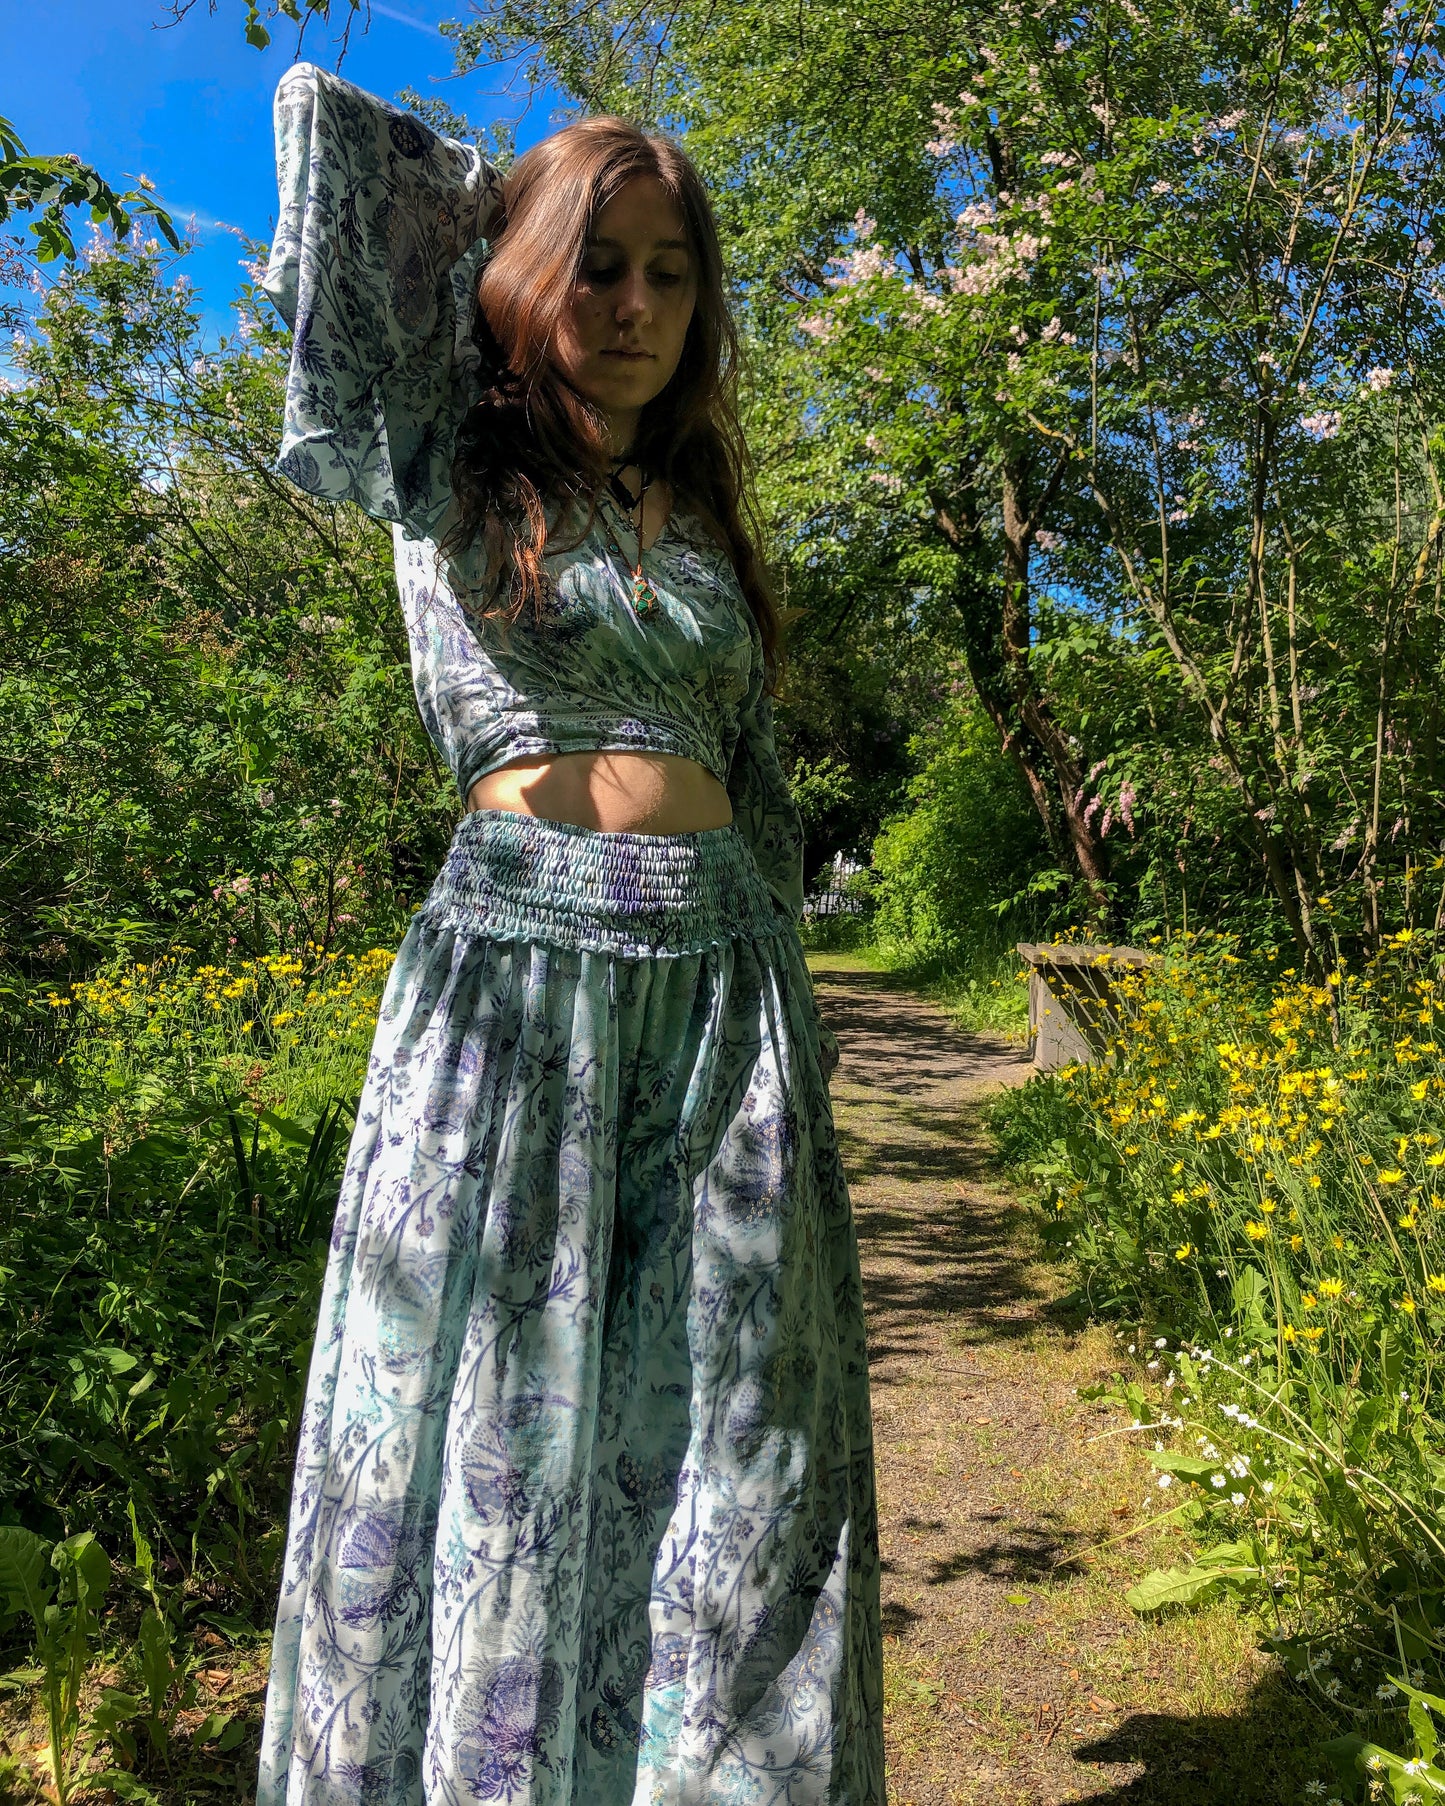 70s Style Boho 2 Piece Pant+ Top Outfit